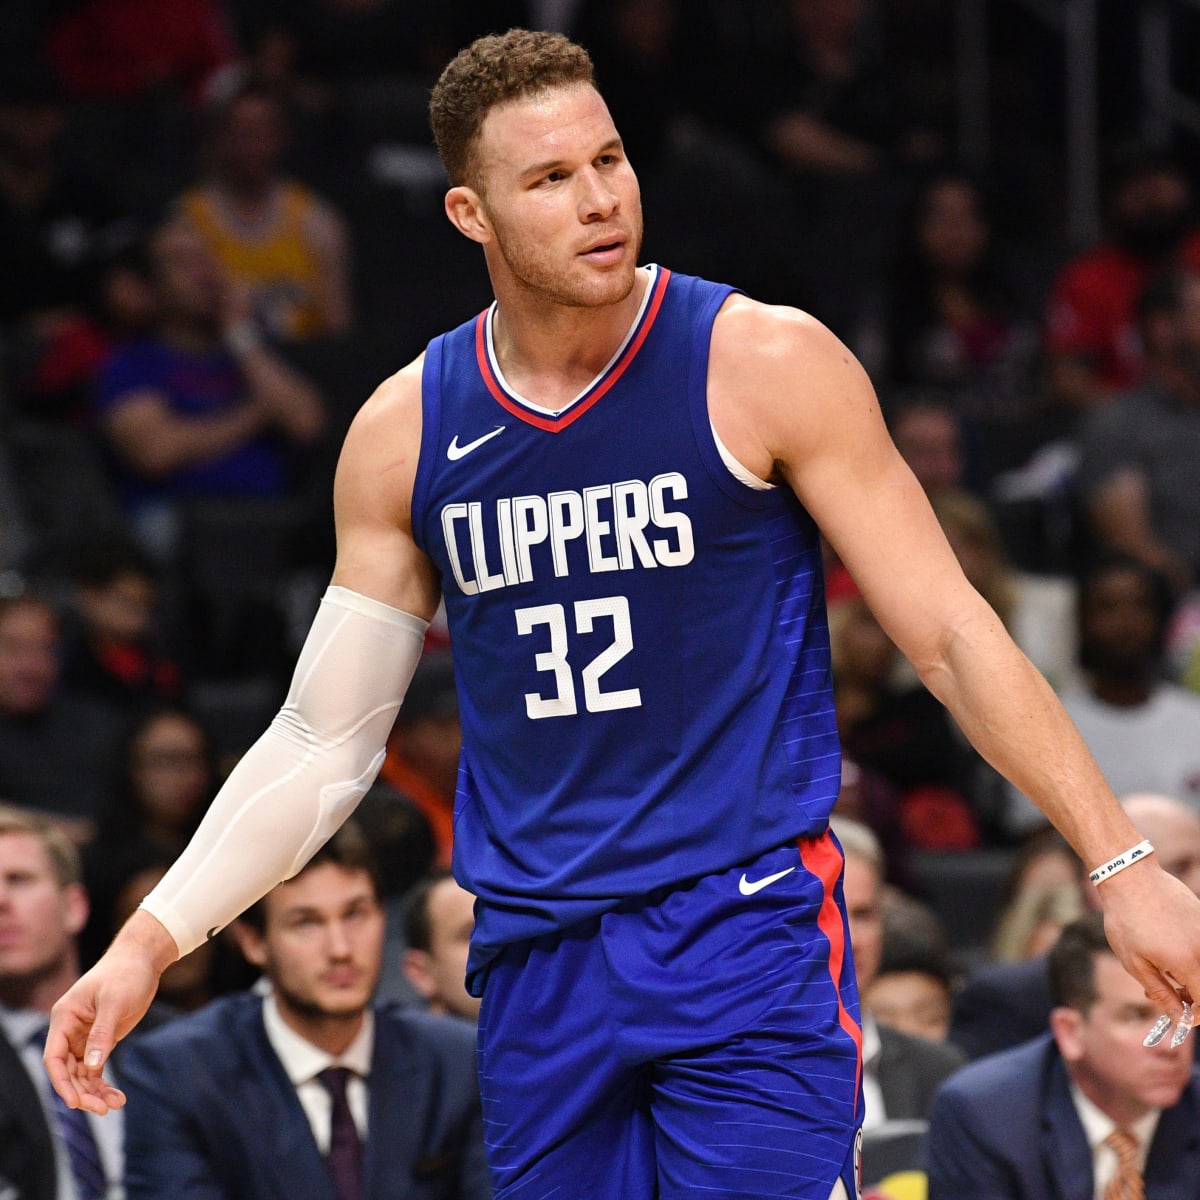 Clippers 'City' jerseys debut on Sports Illustrated cover - Sports